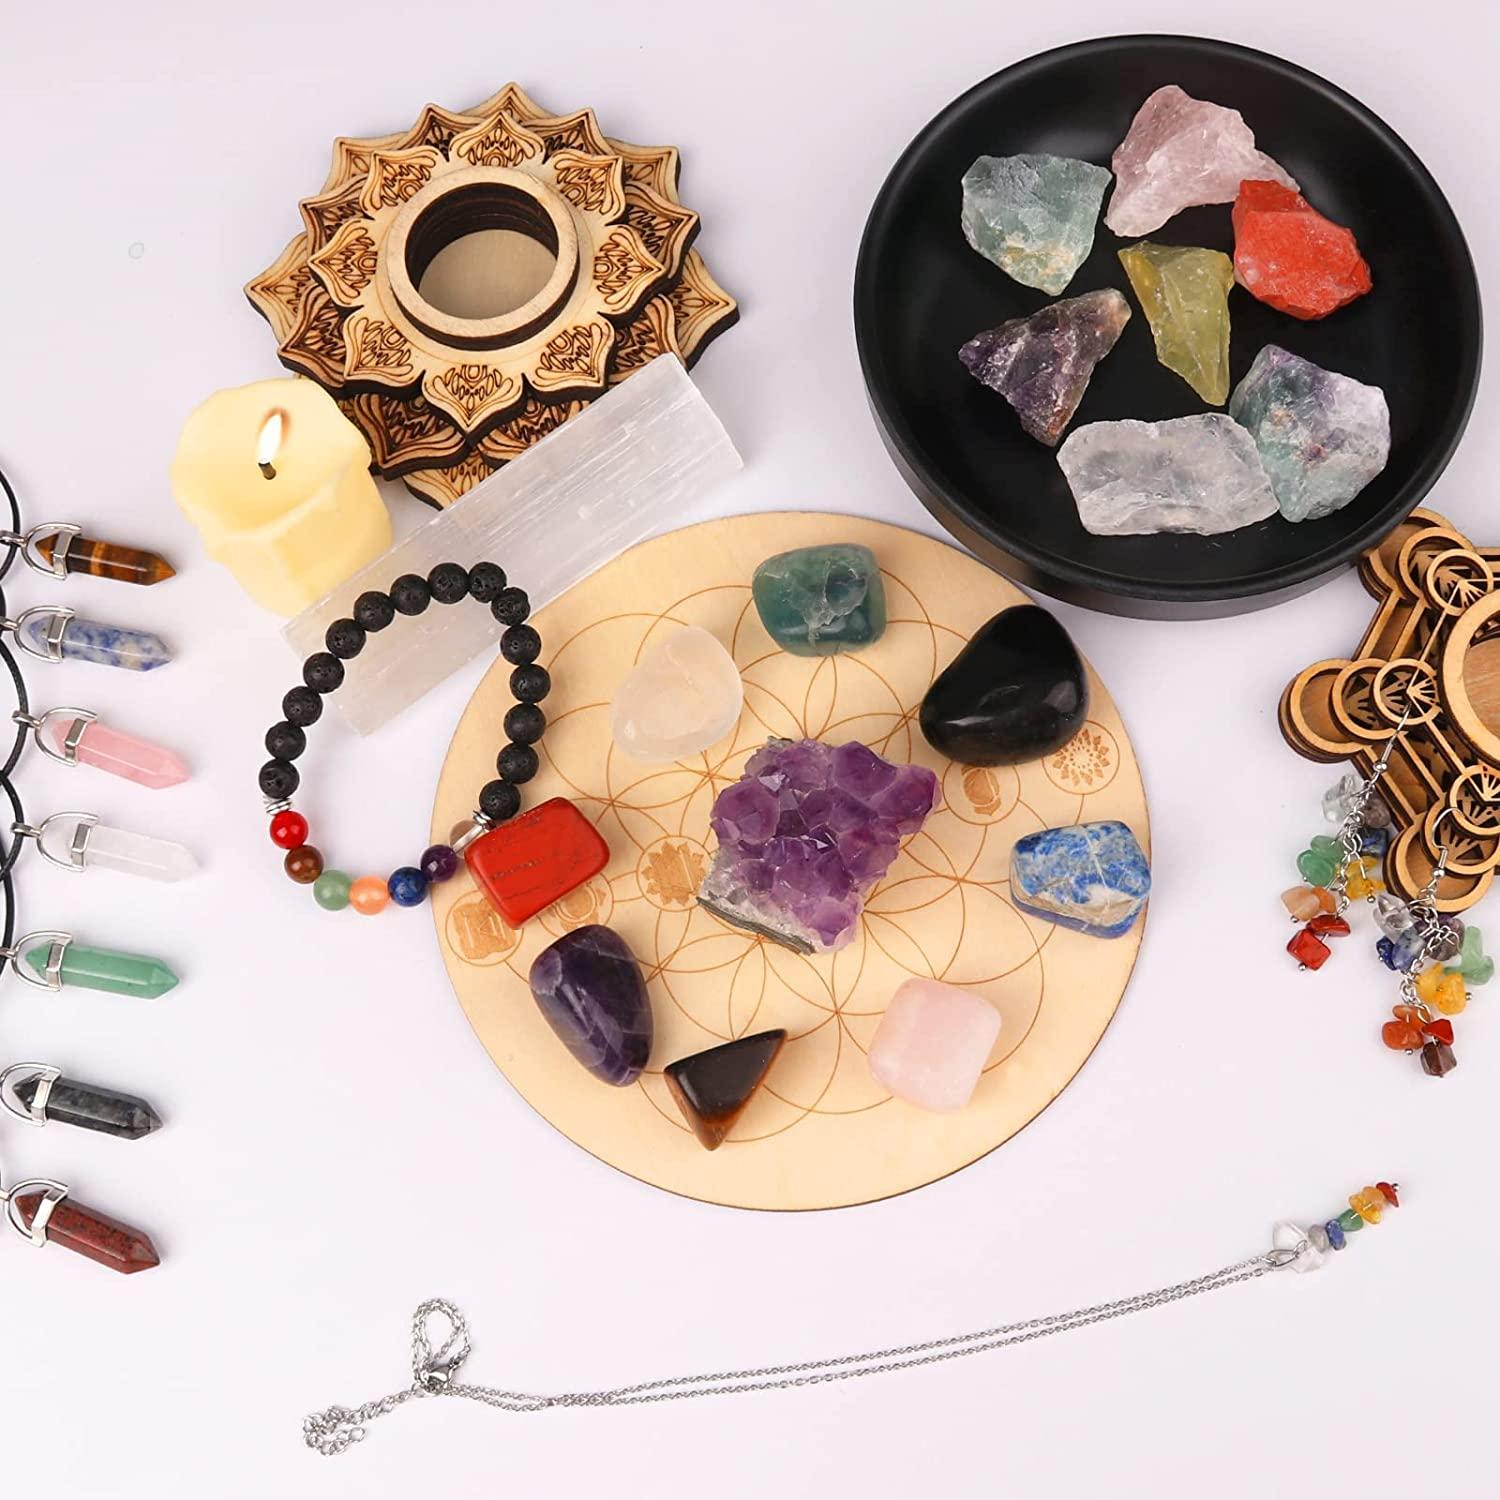 Healing Crystals Set Include 7 Chakra Stones, 7 Tumbled Stones, 7 Crystals  Necklaces, 3 Crystals Jewelry,Amethyst Crystal and Selenite,Clear Quartz,2  Storage Bags,7 Jewelry Ropes-36 PCS 36packs